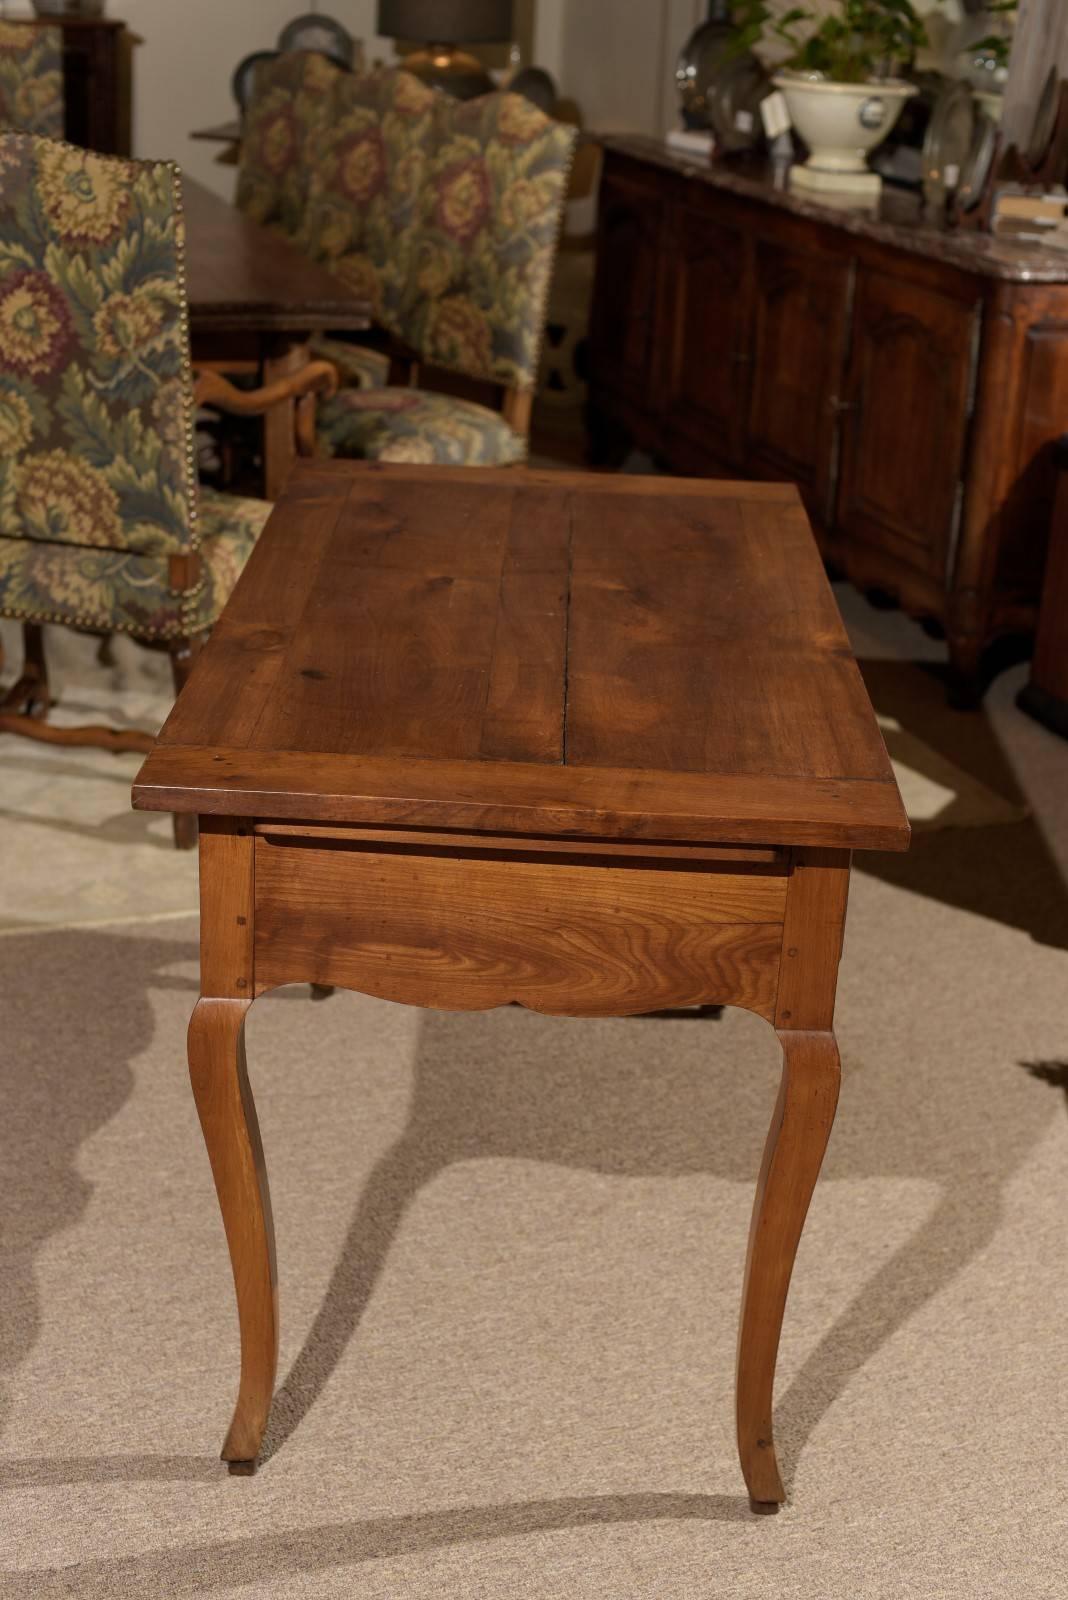 19th Century Cherry Louis XV Style Table with Two Drawers, circa 1820 For Sale 6